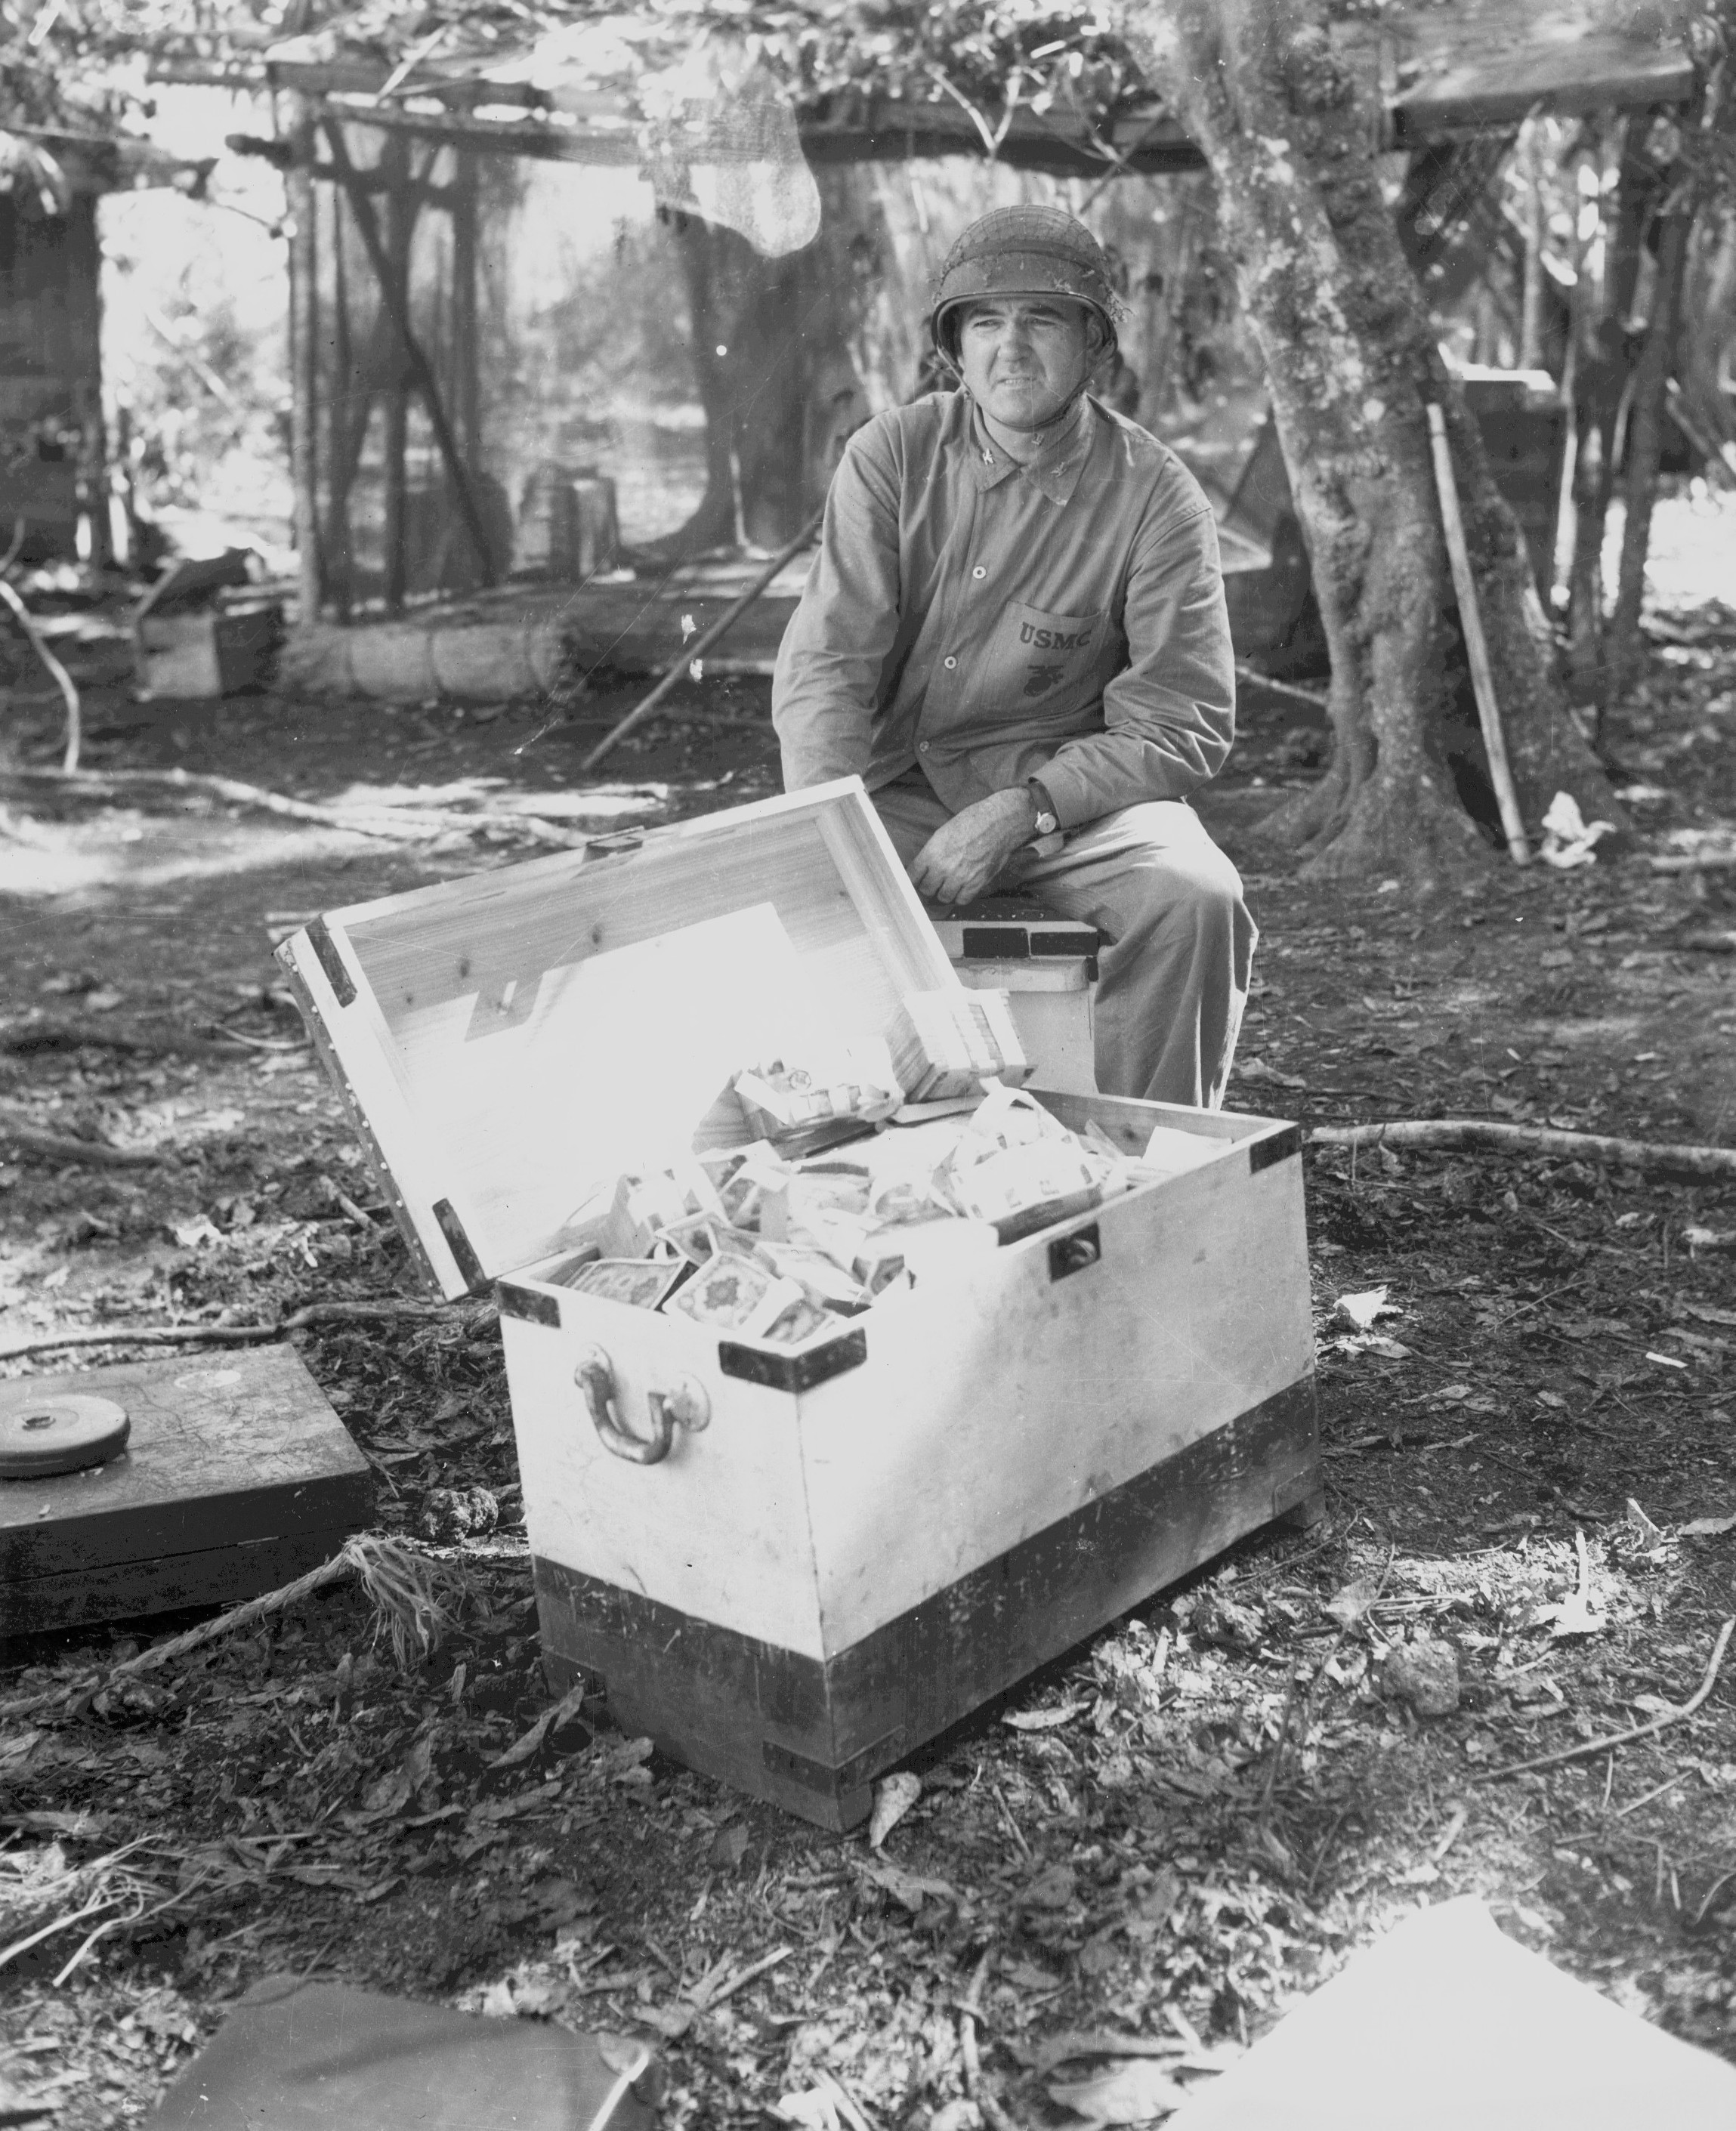 US Marine Colonel Frank Goettge with captured Japanese currency, Guadalcanal, Solomon Islands, Aug 1942